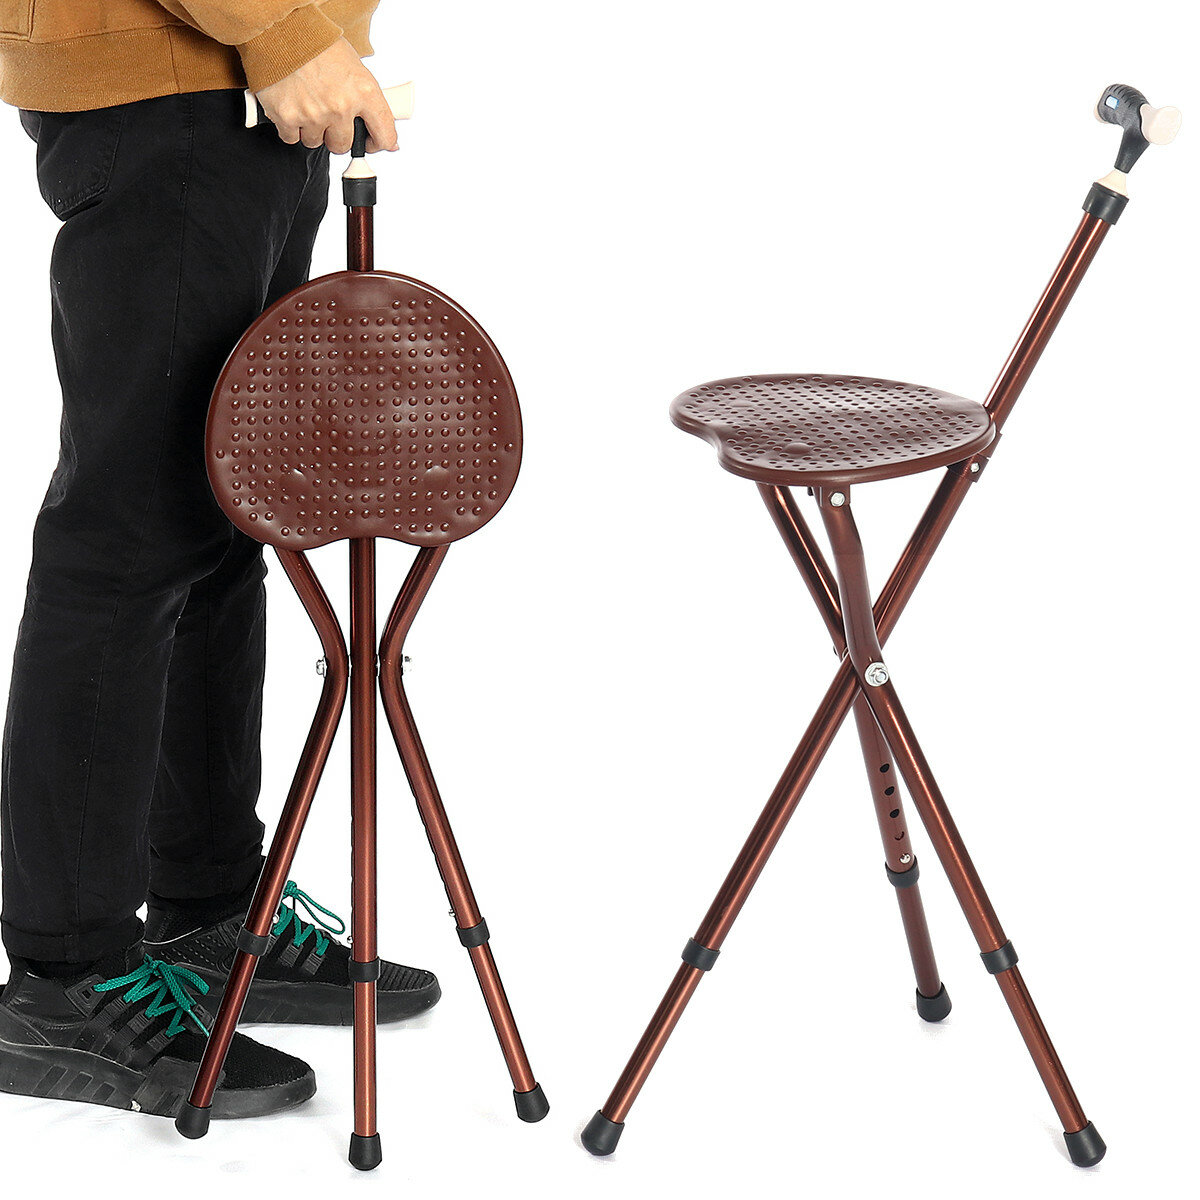 Height Adjustable Folding Rest-Stool Chair Cane With LED Light Portable Walking-Stick Chair Folding Chair For The Old